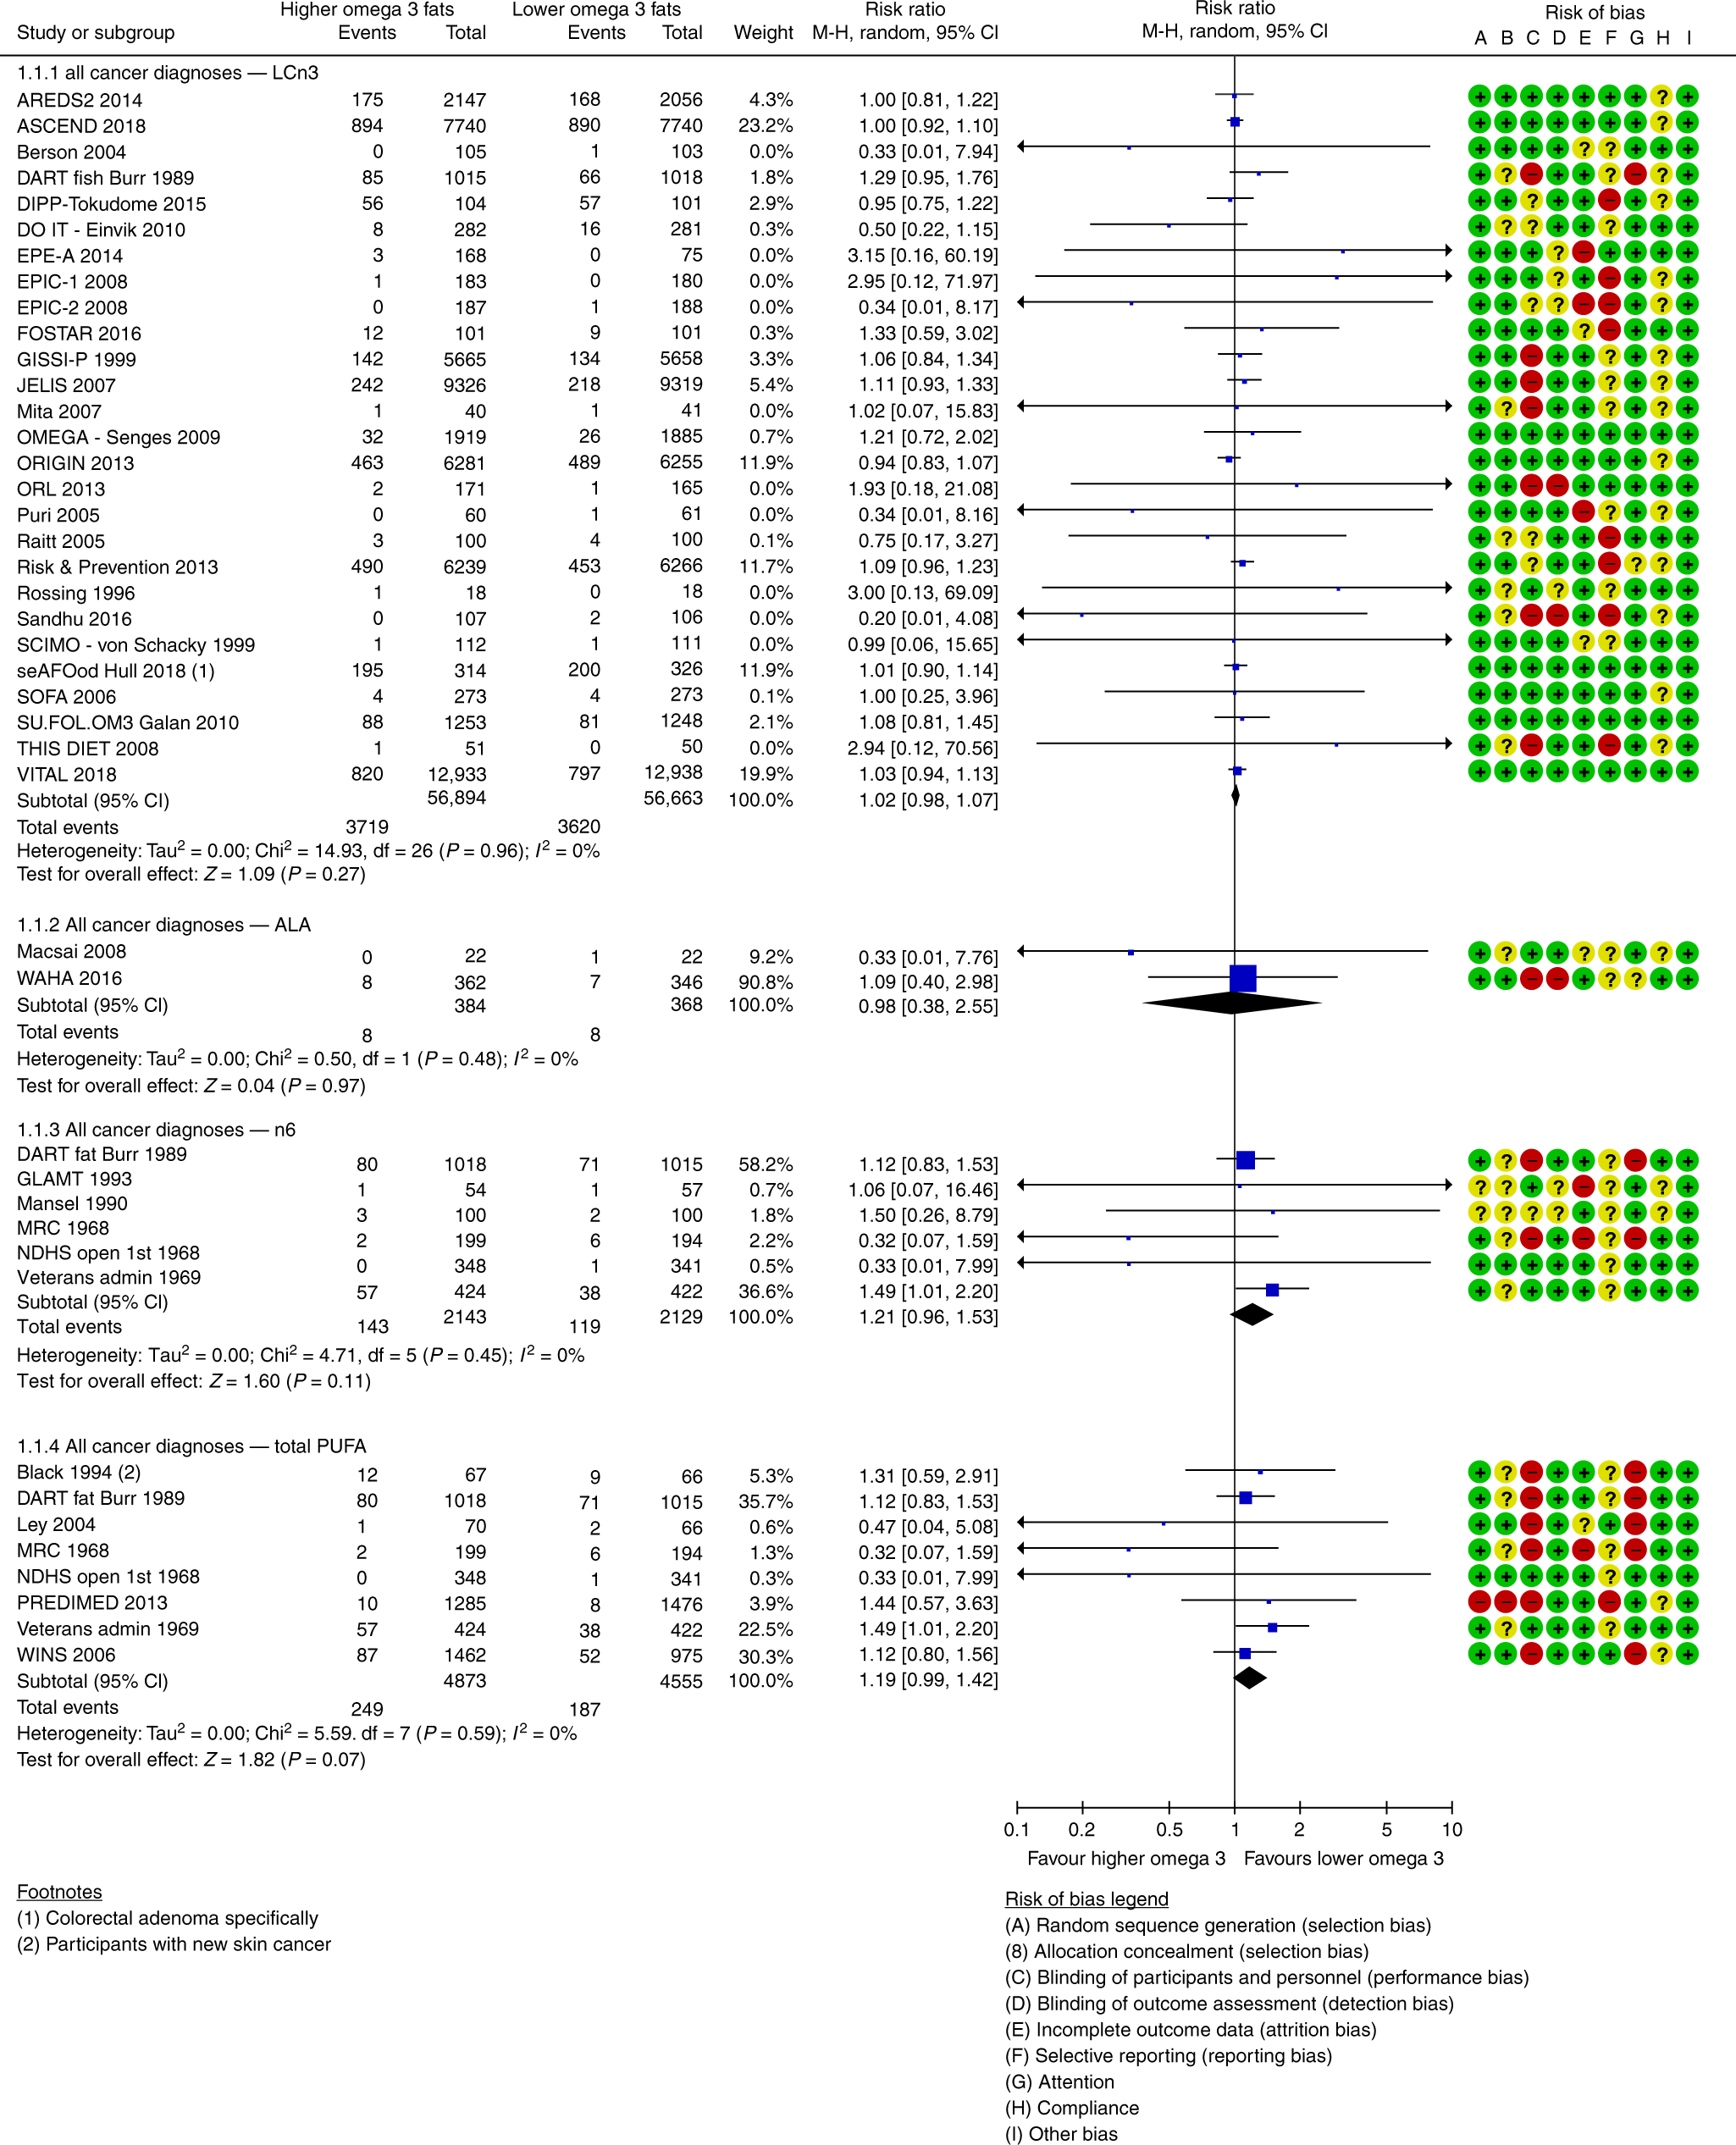 Omega-3, omega-6 and total dietary polyunsaturated fat on cancer incidence:  systematic review and meta-analysis of randomised trials | British Journal  of Cancer